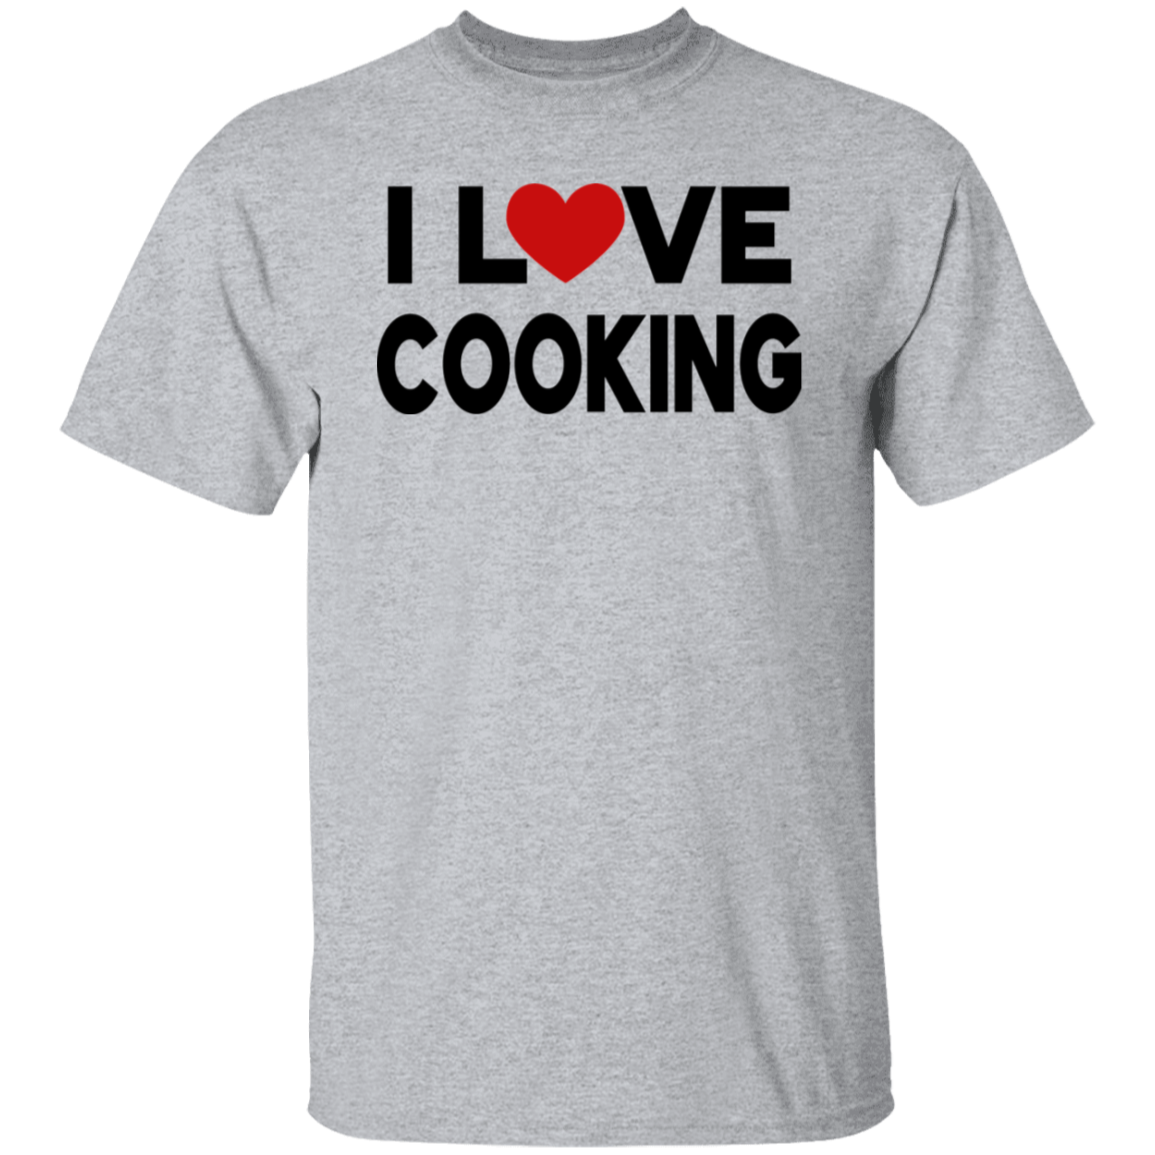 I Love Cooking T-Shirt